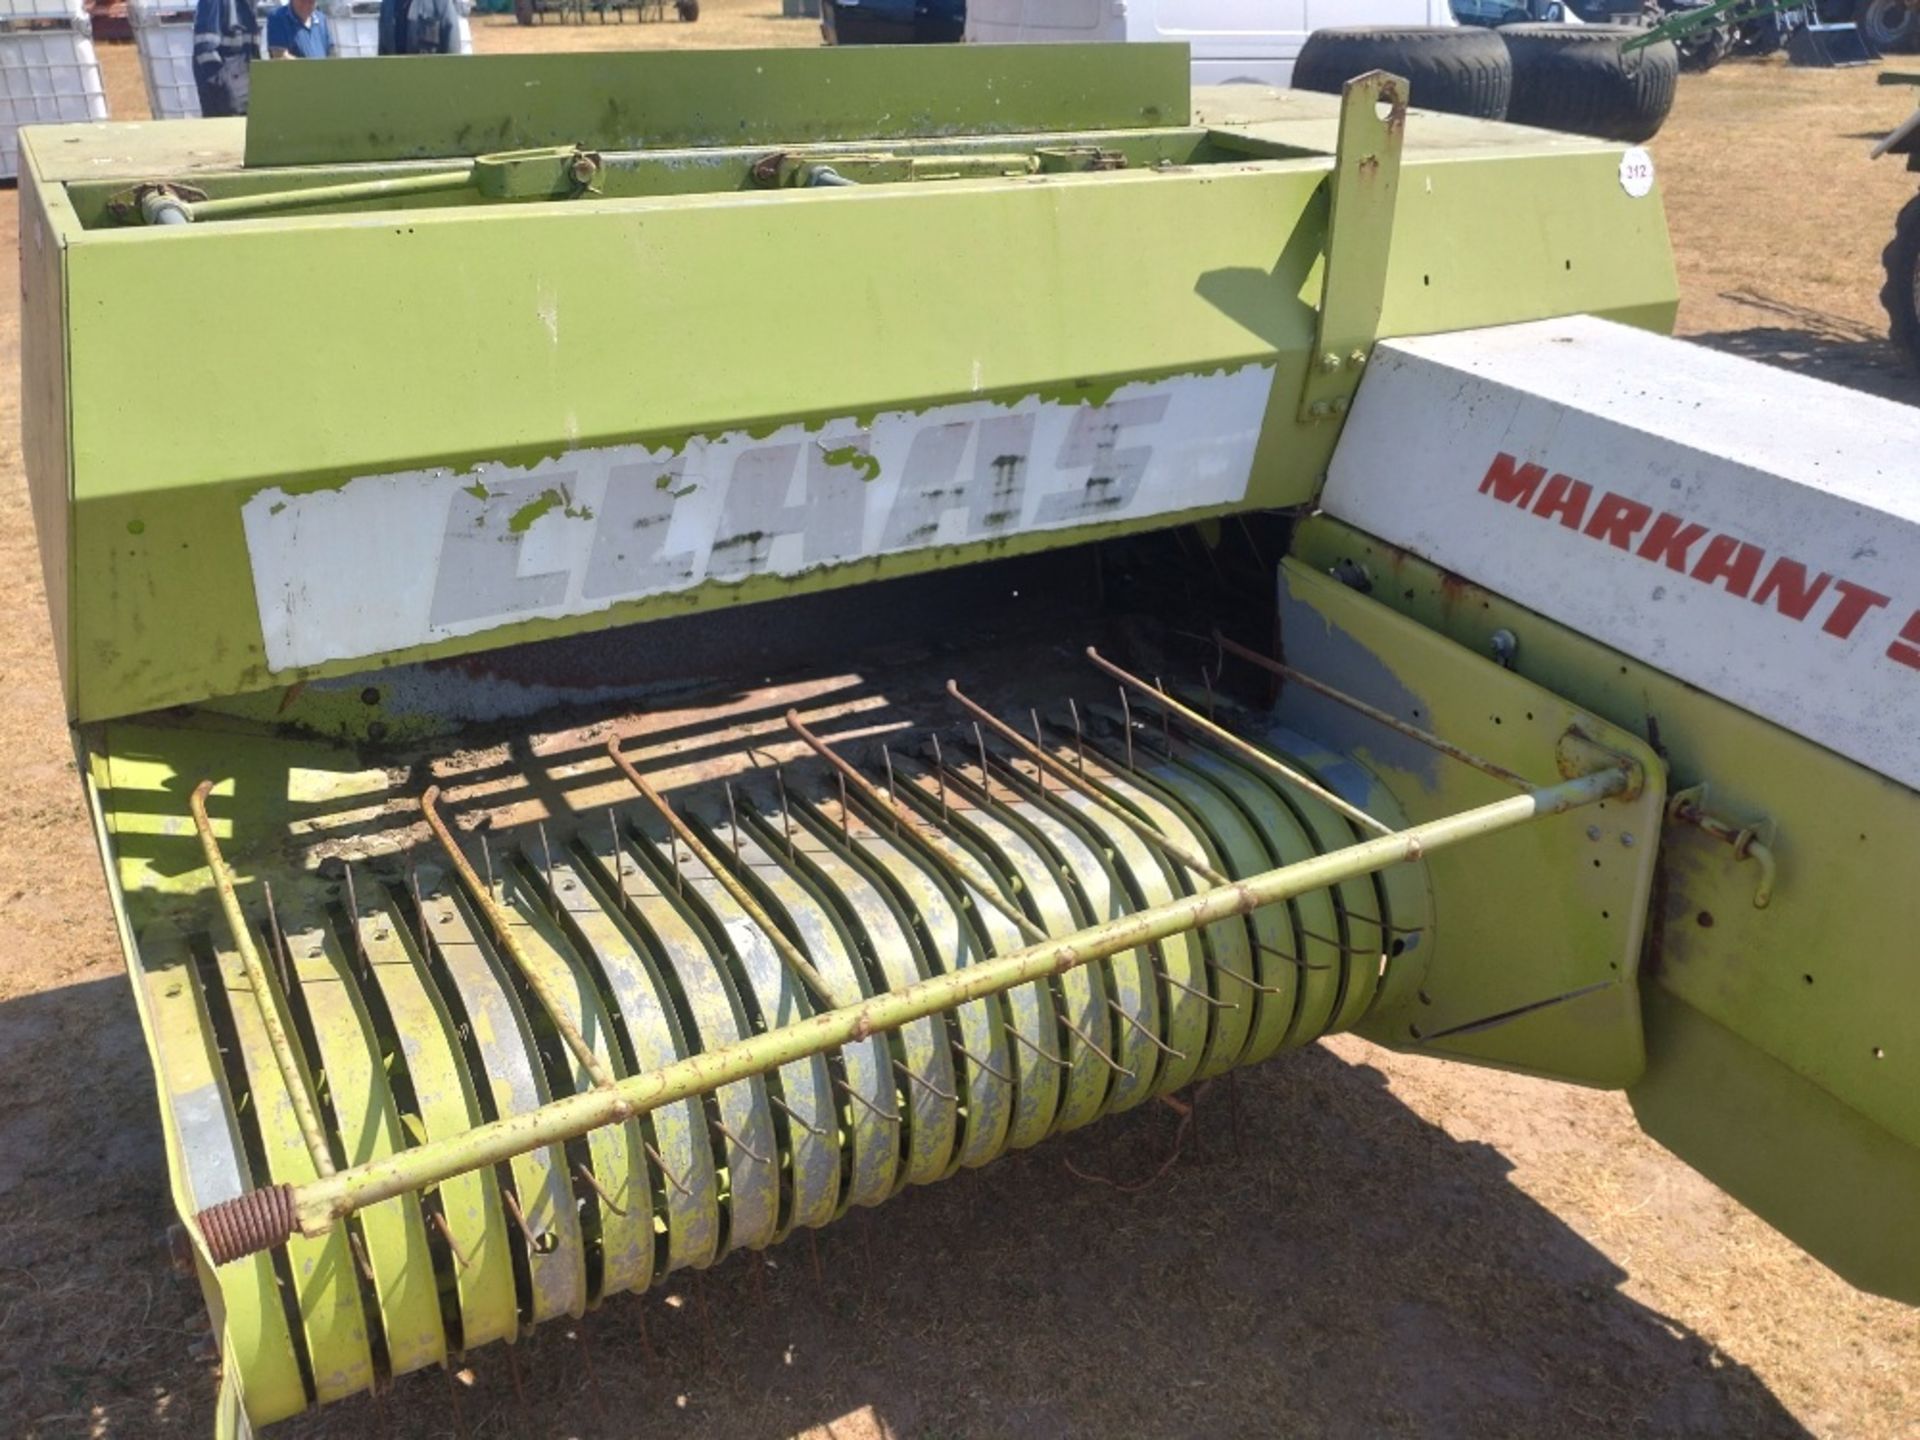 Claas Markant 55 Baler, hydraulic pick up, brackets for using and road tow flat 8 sledge, - Image 4 of 5